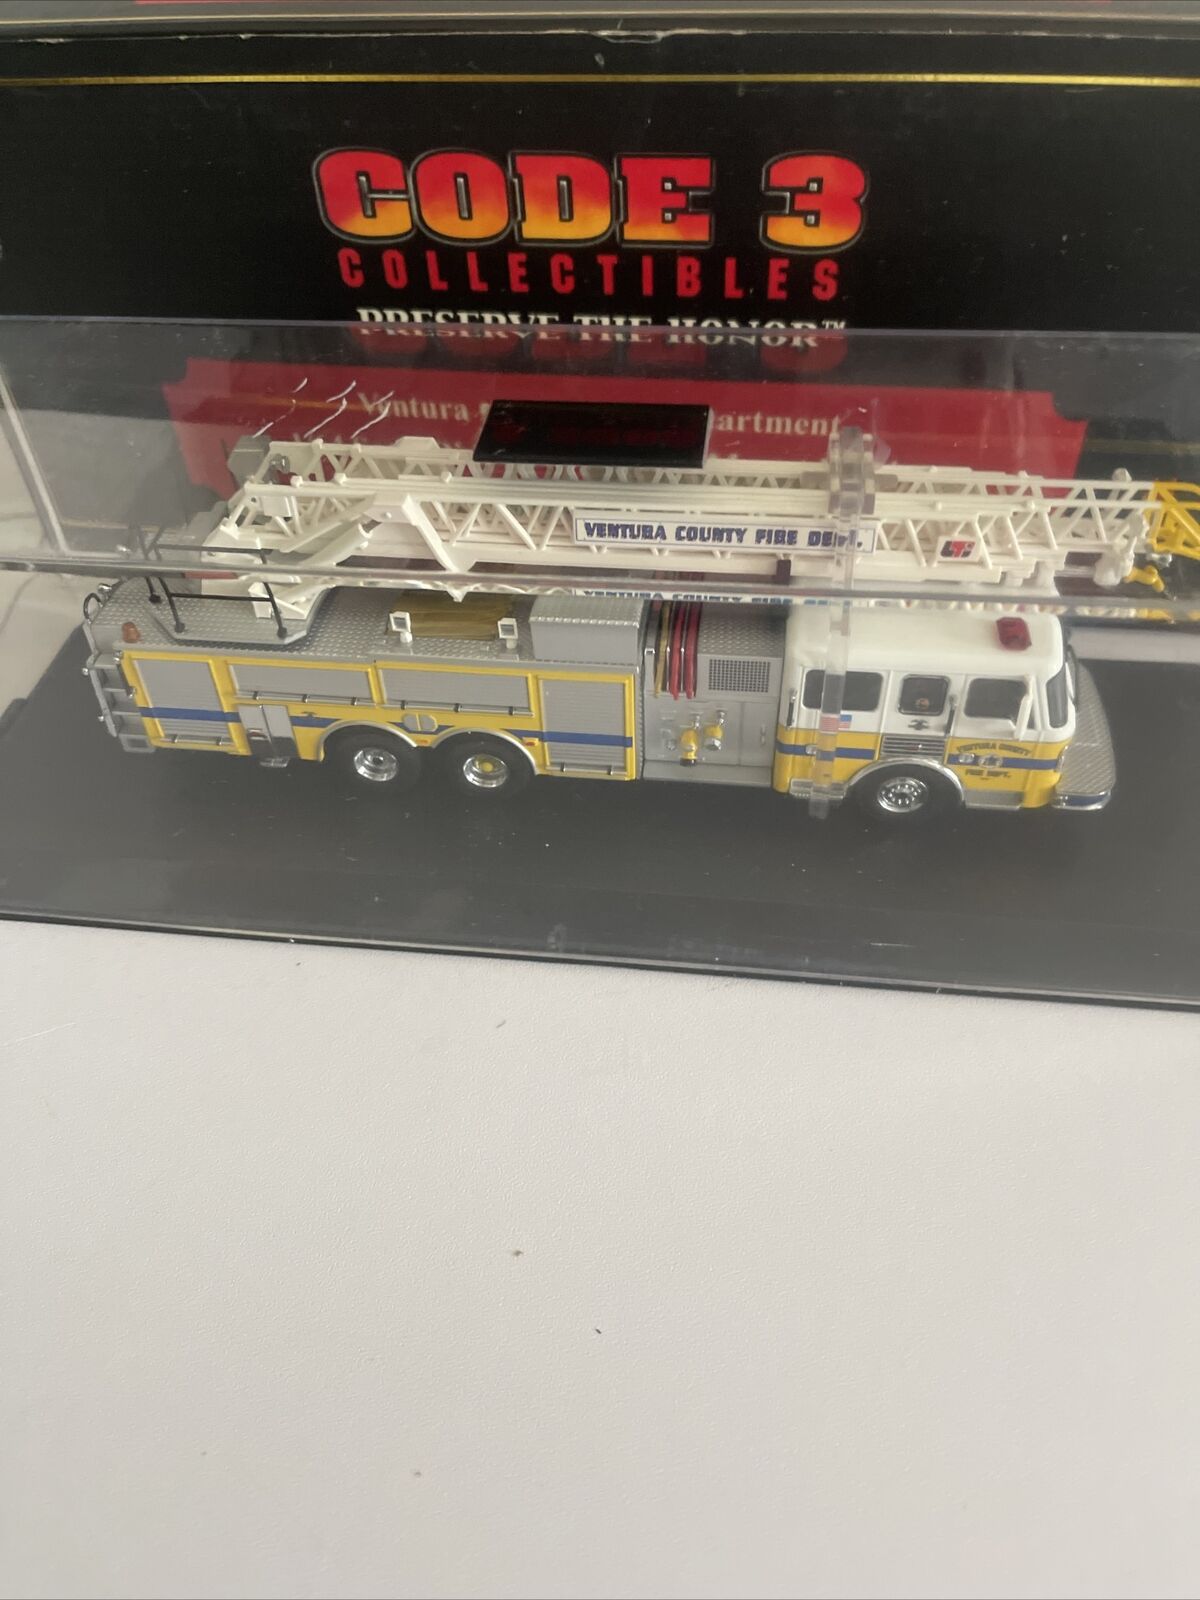 Code 3 Collectibles American LaFrance Ventura County Ladder Co. Rescue Engine 40